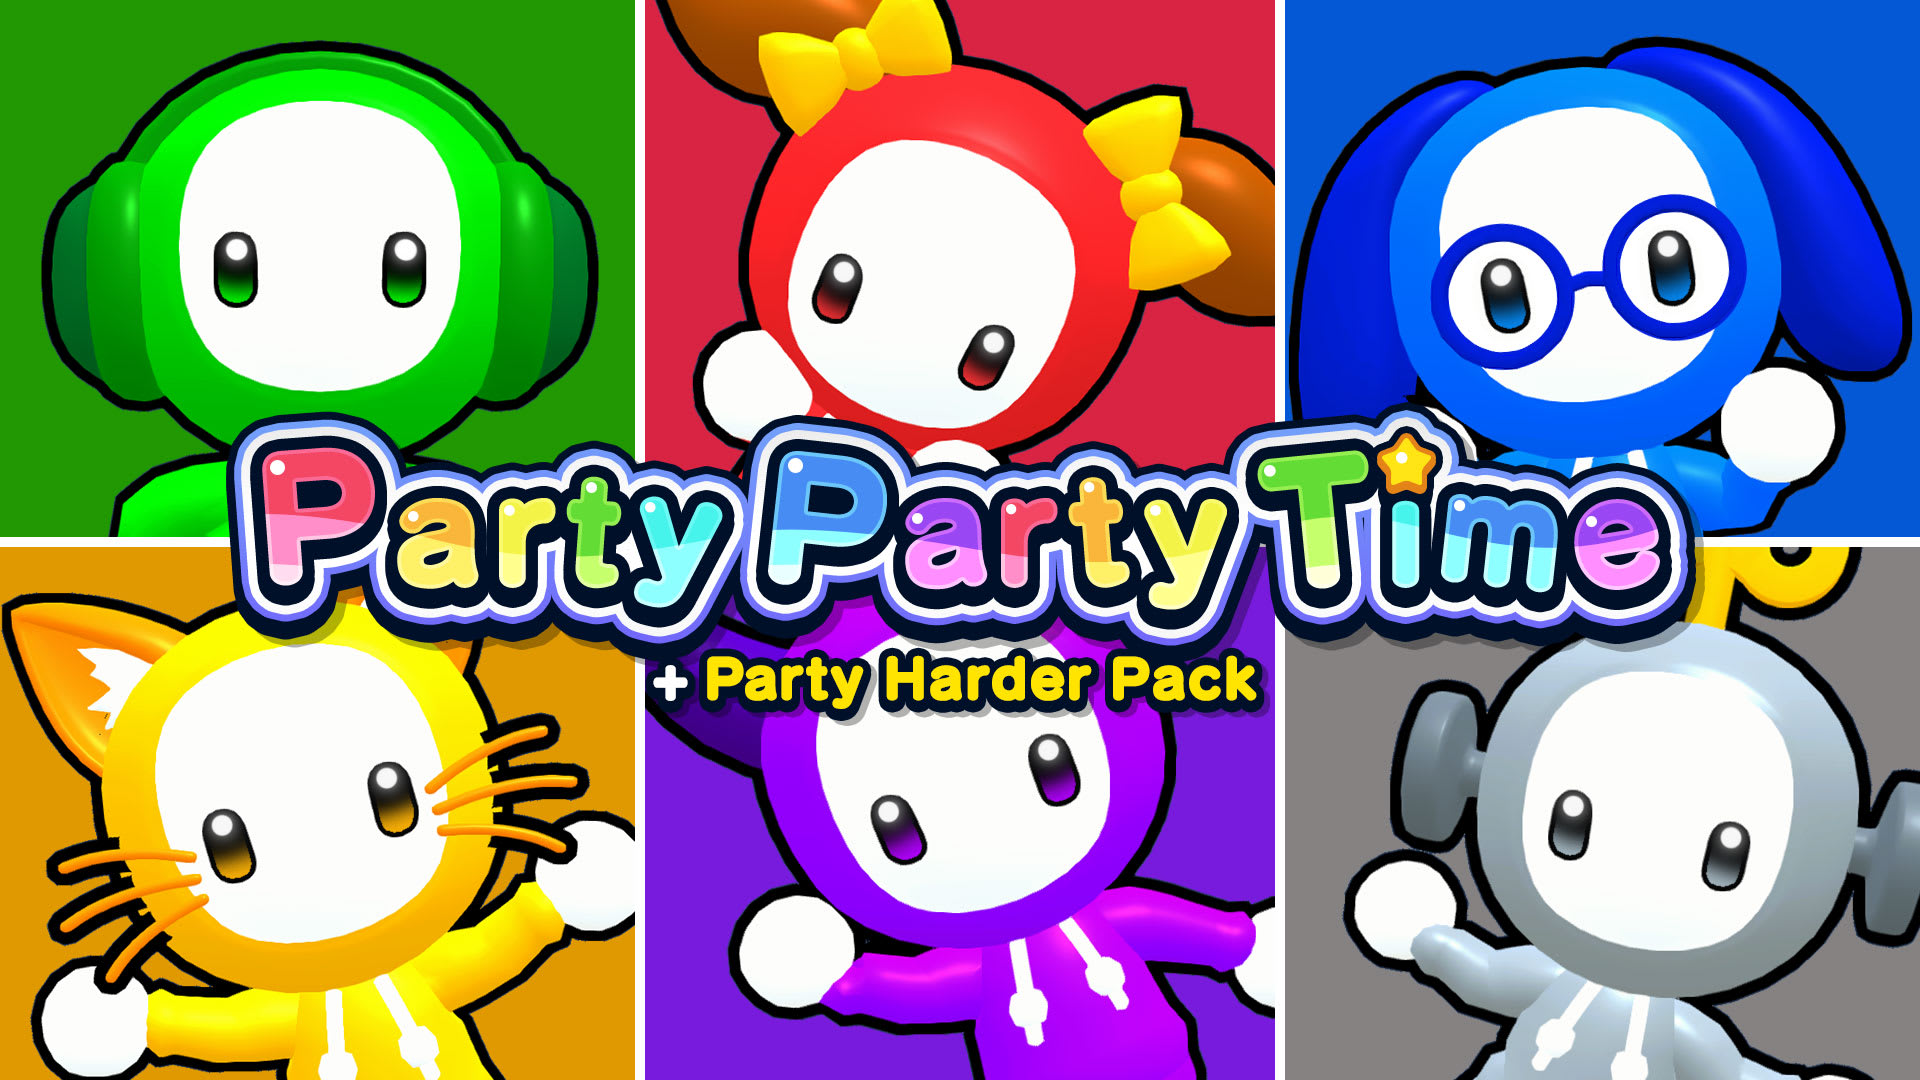 Party Party Time + Party Harder Pack